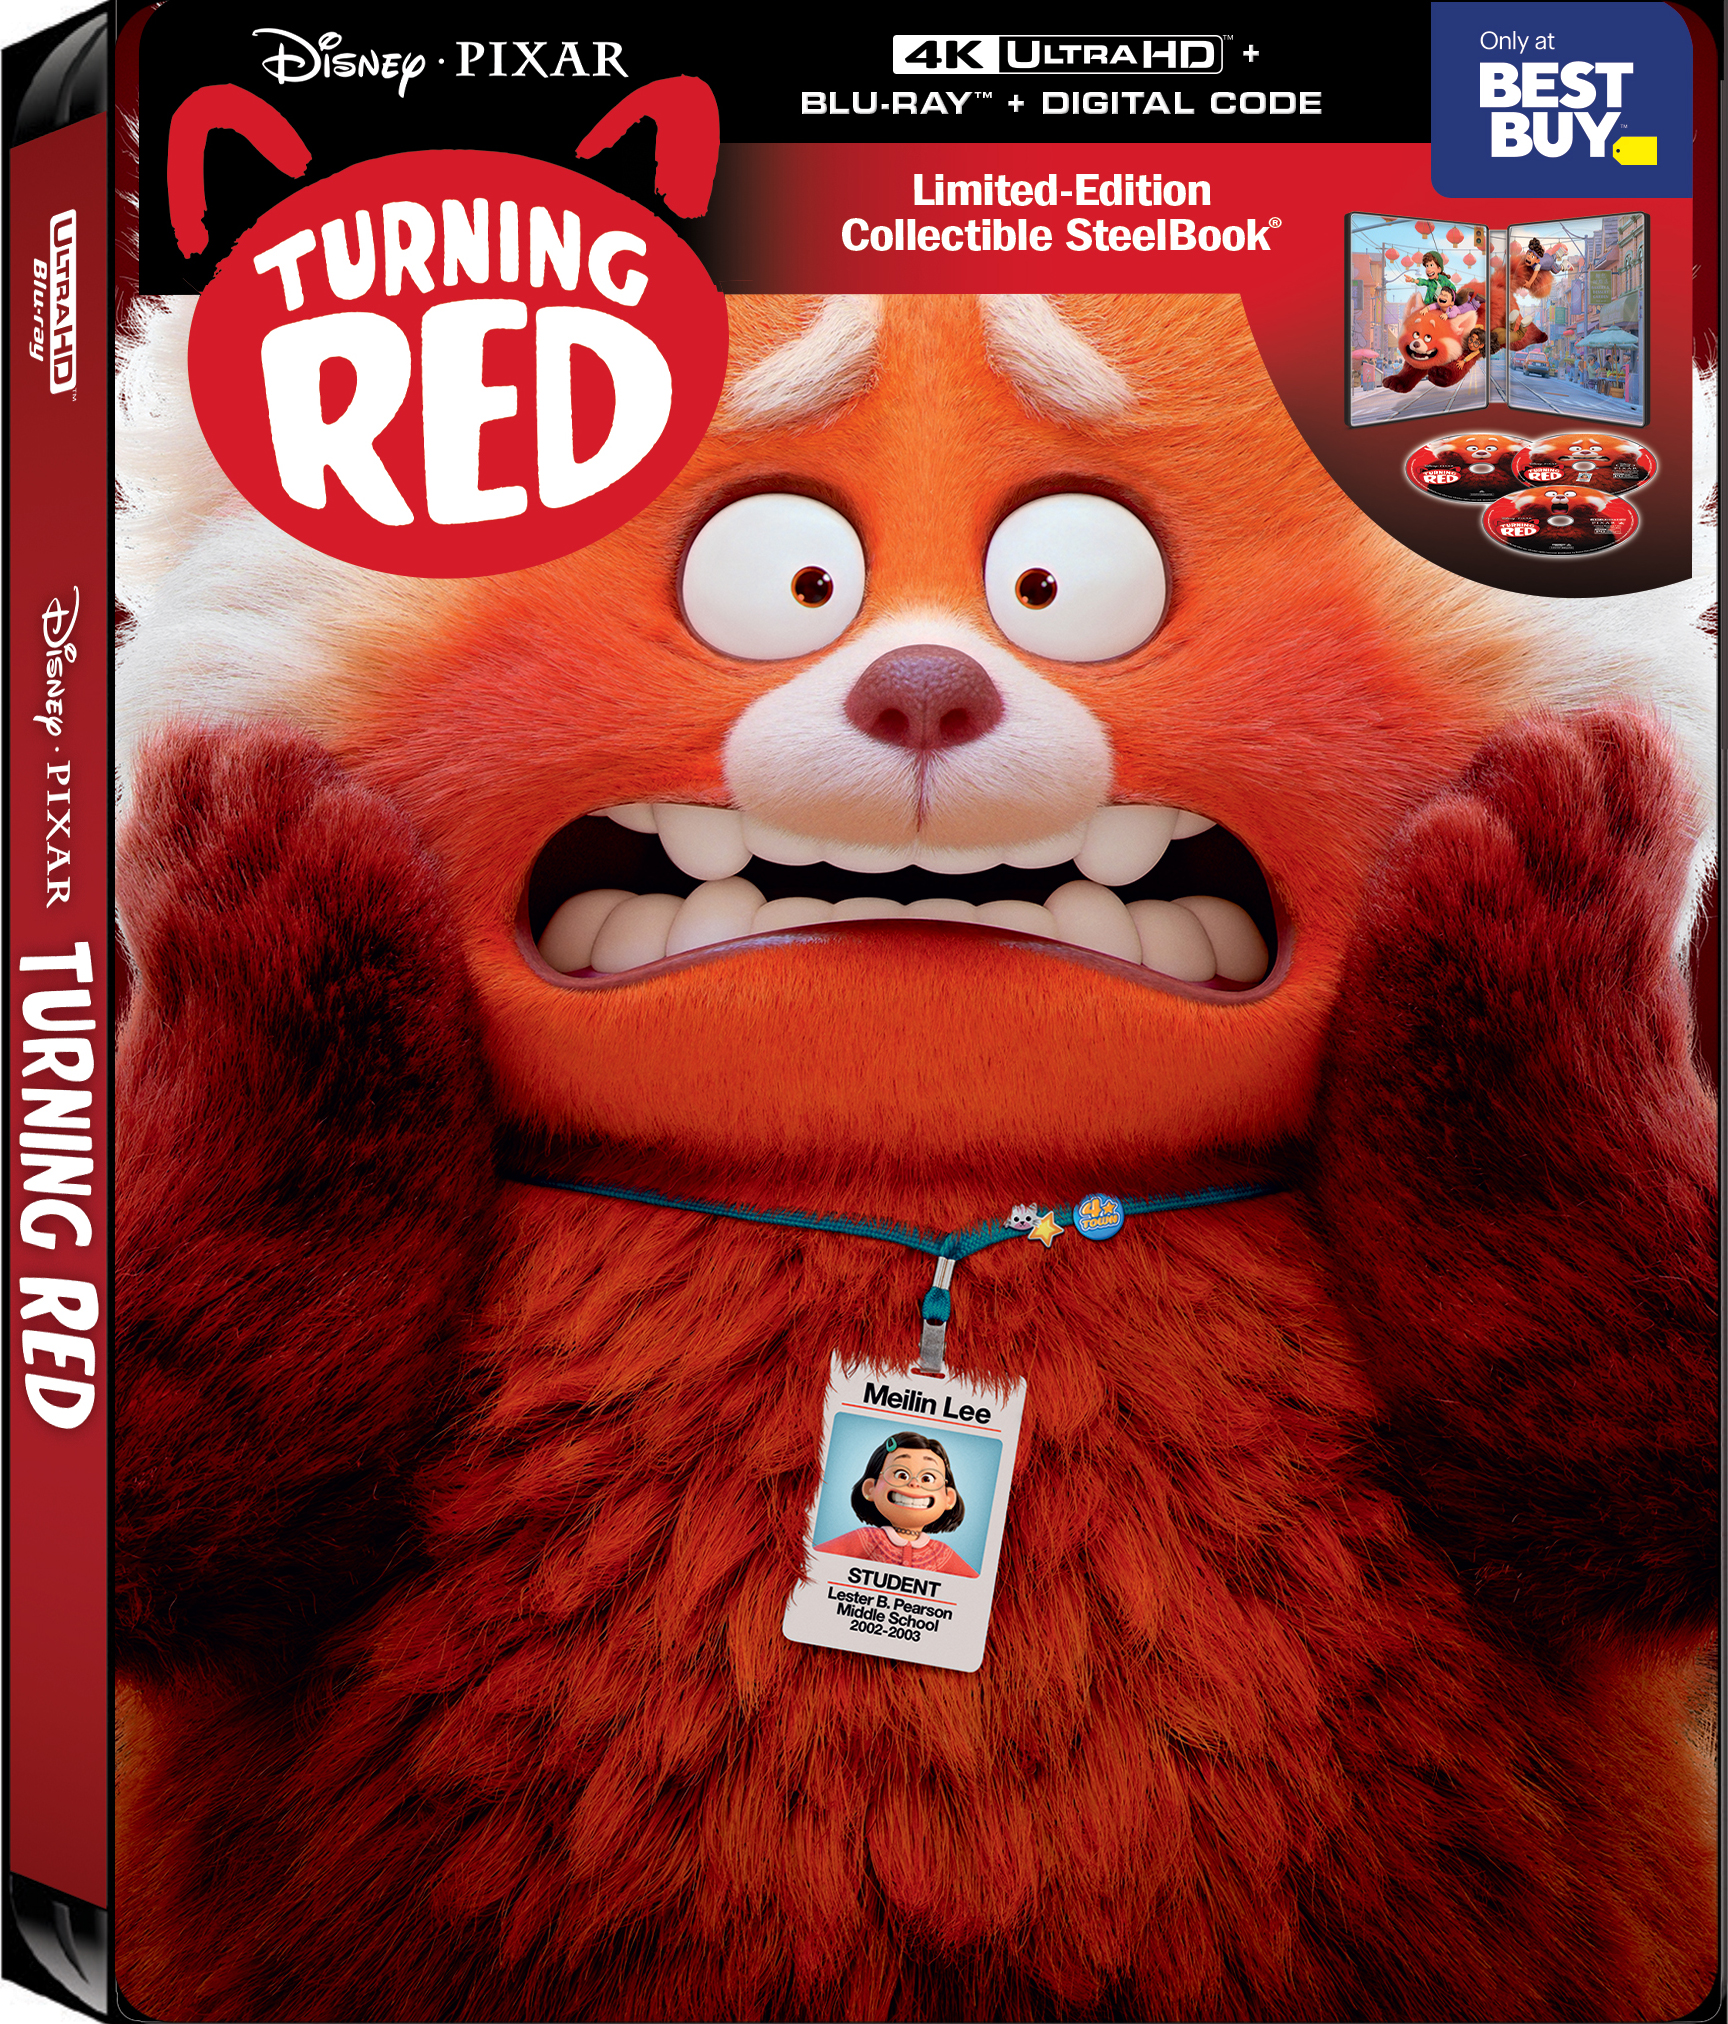 Turning Red [Includes Digital Copy] [Blu-ray/DVD] [2022] - Best Buy